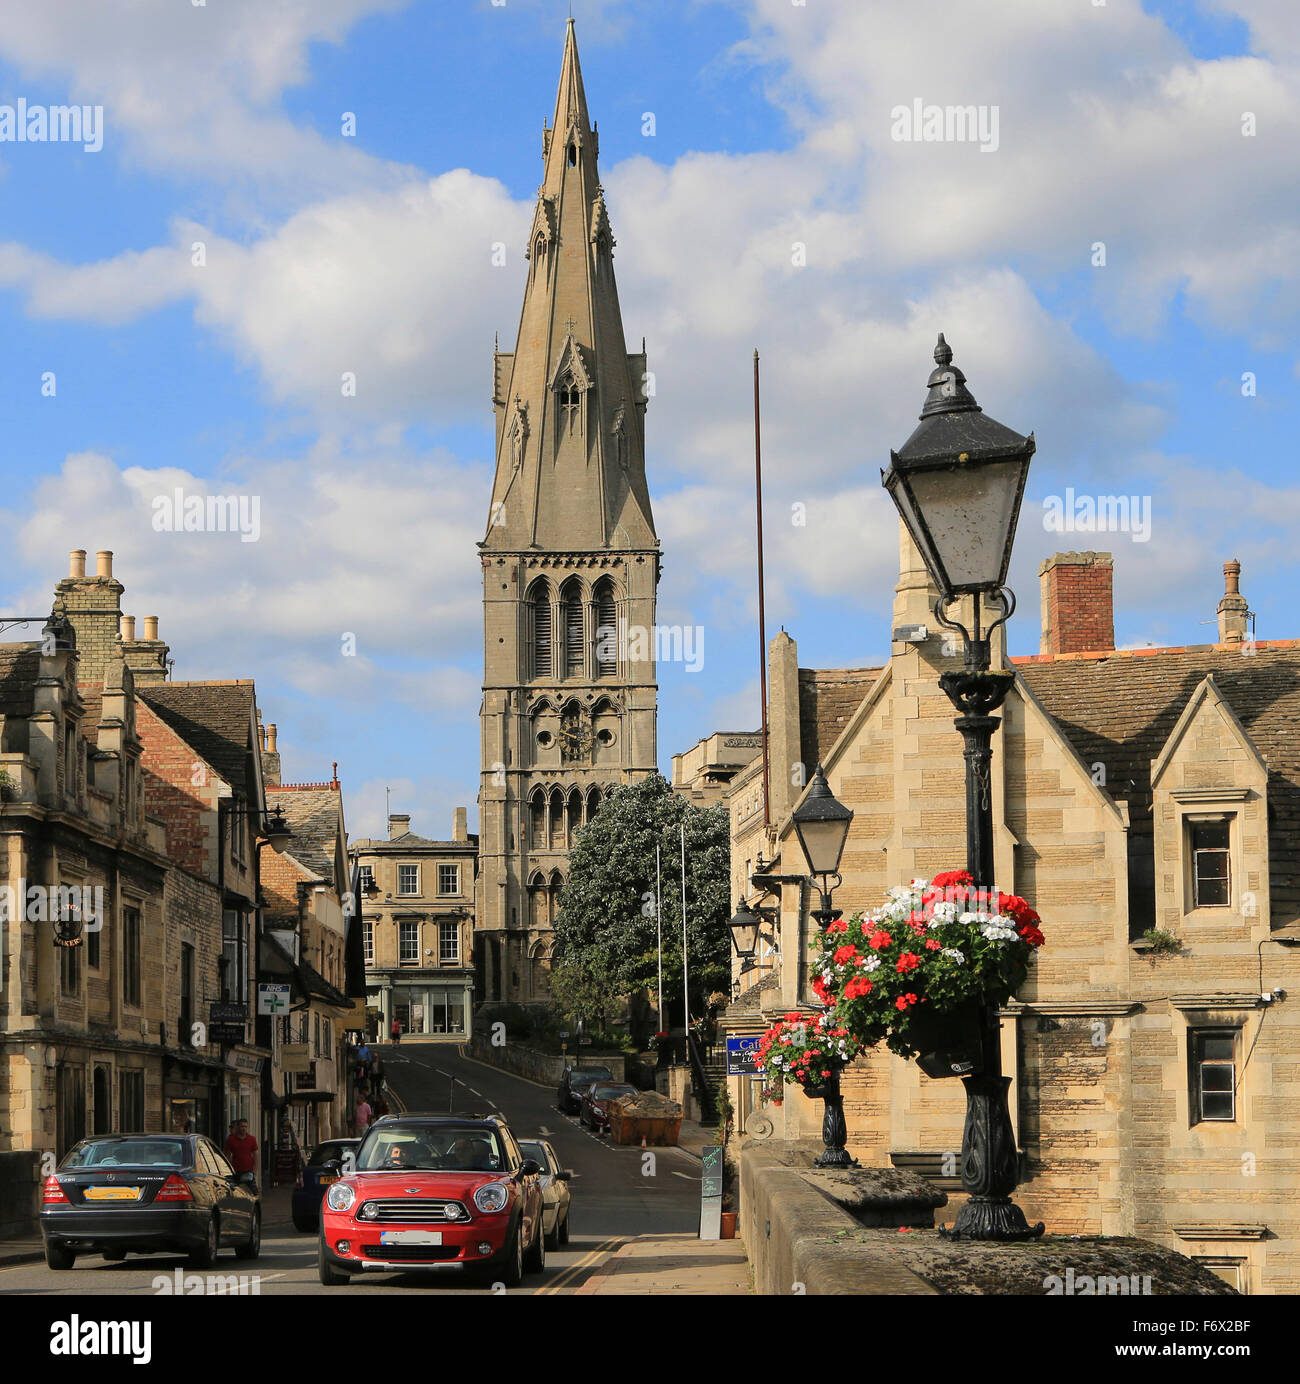 Bridge over the River Welland and St Mary's Hill, Stamford, Lincolnshire, England, UK Stock Photo